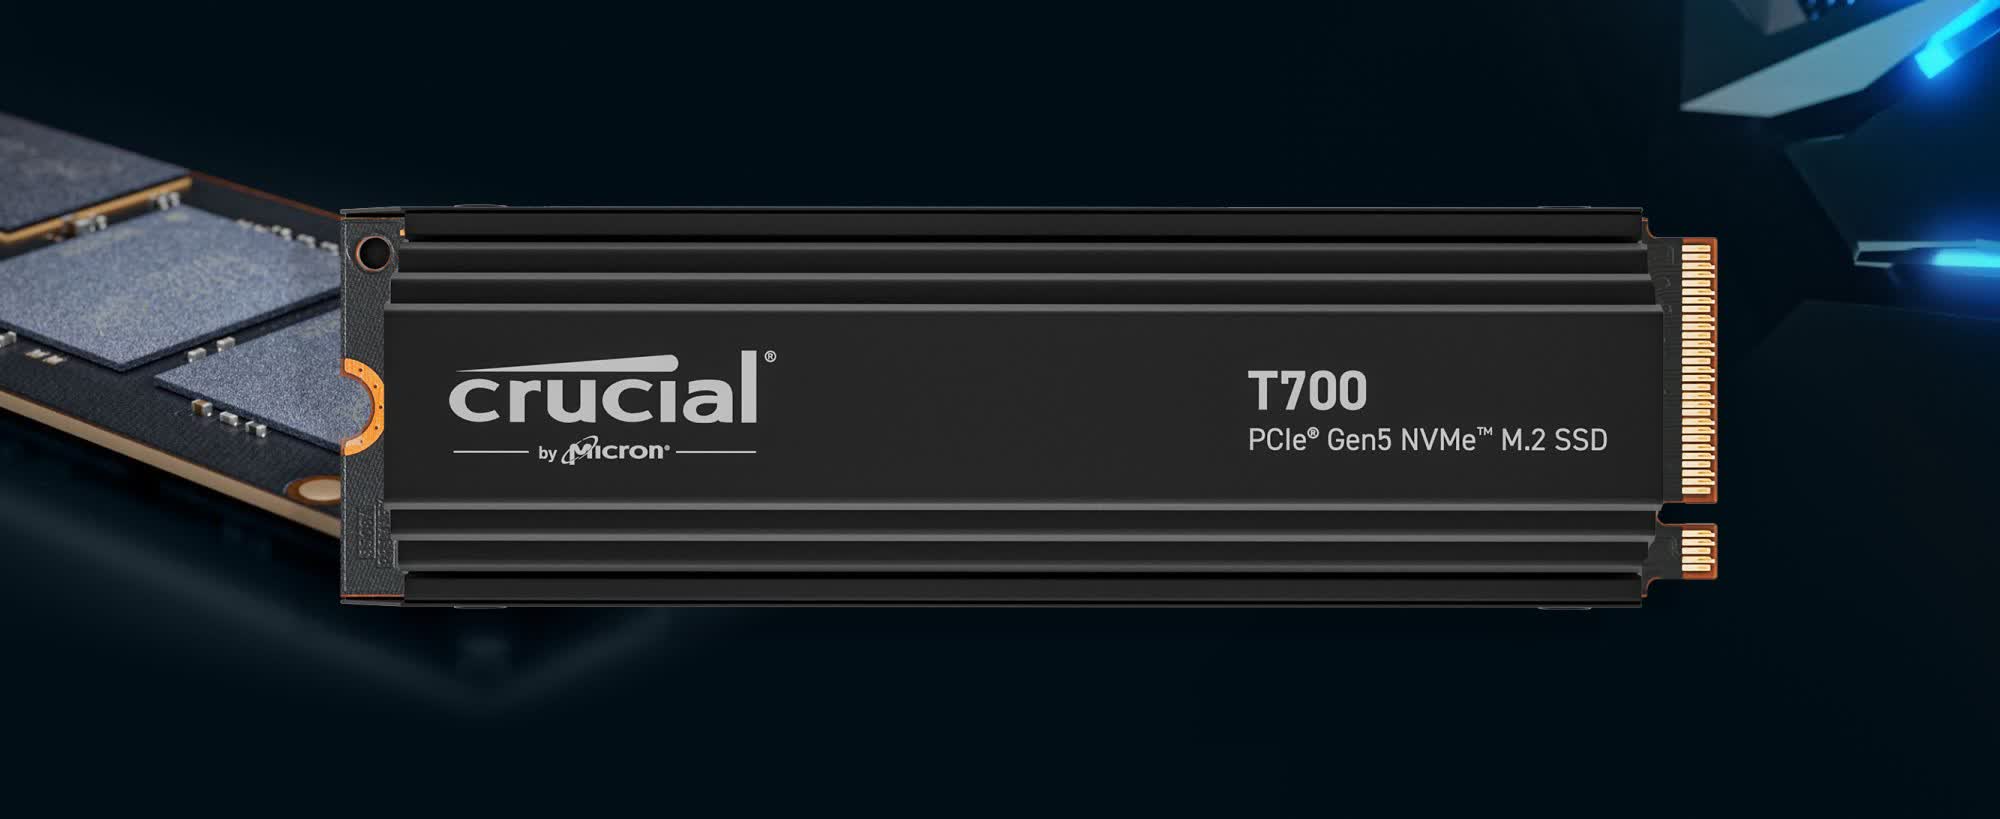 Crucial's T700 PCIe 5.0 SSD can throttle to HDD speeds without a cooler